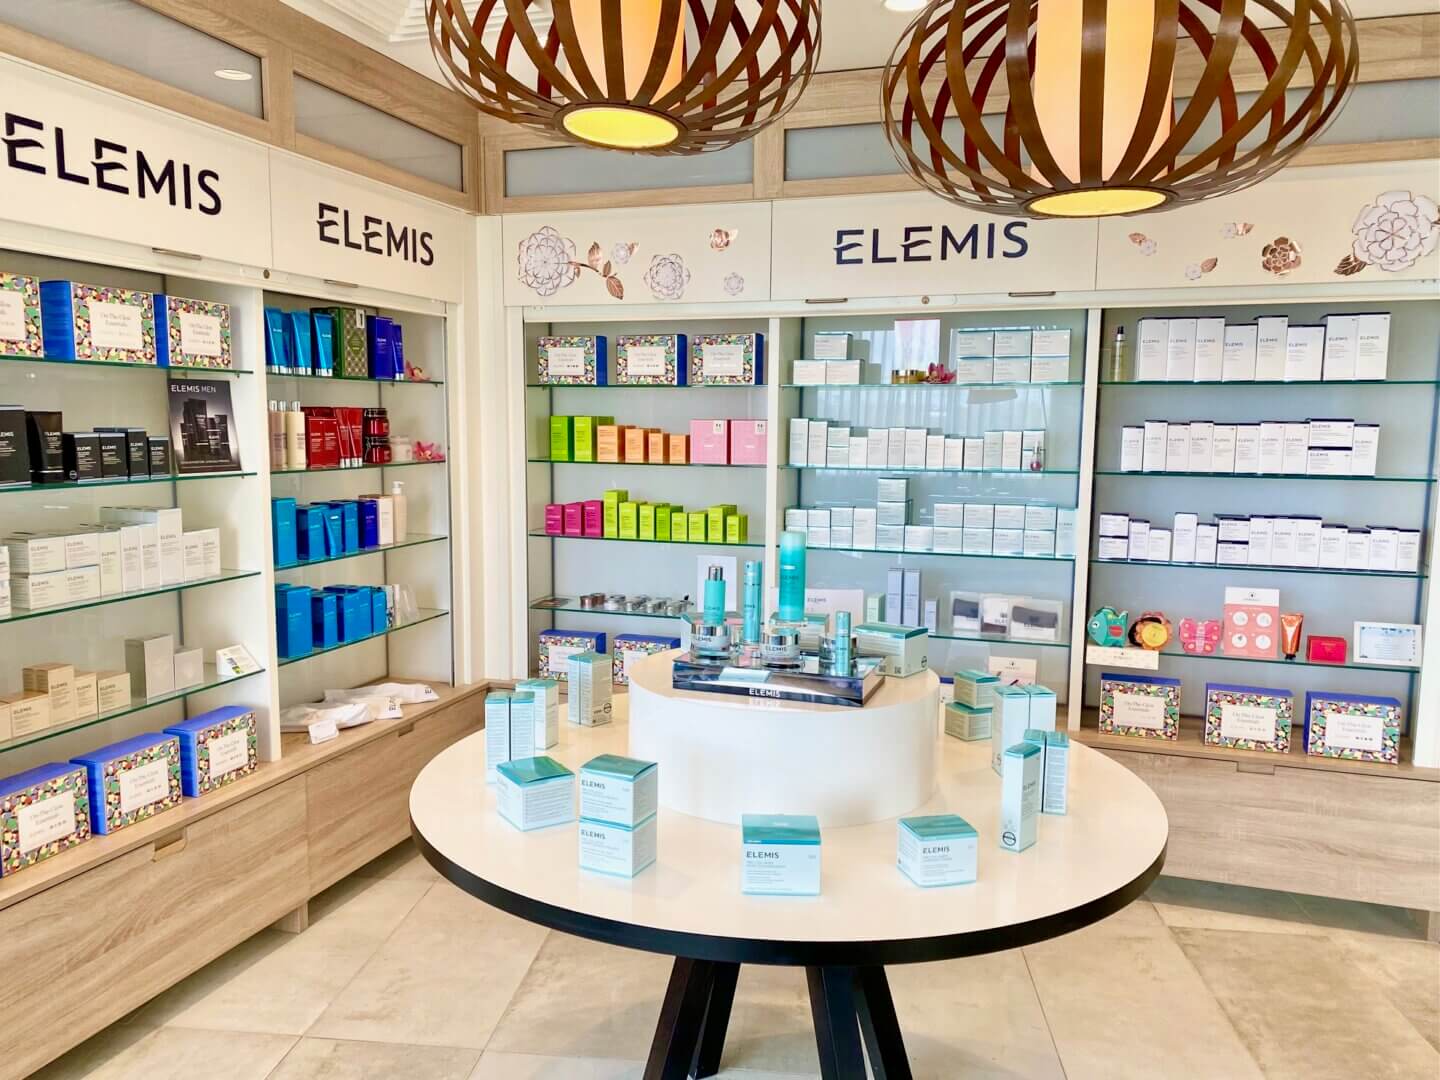 Display of Elemis beauty products on a round table and shelving